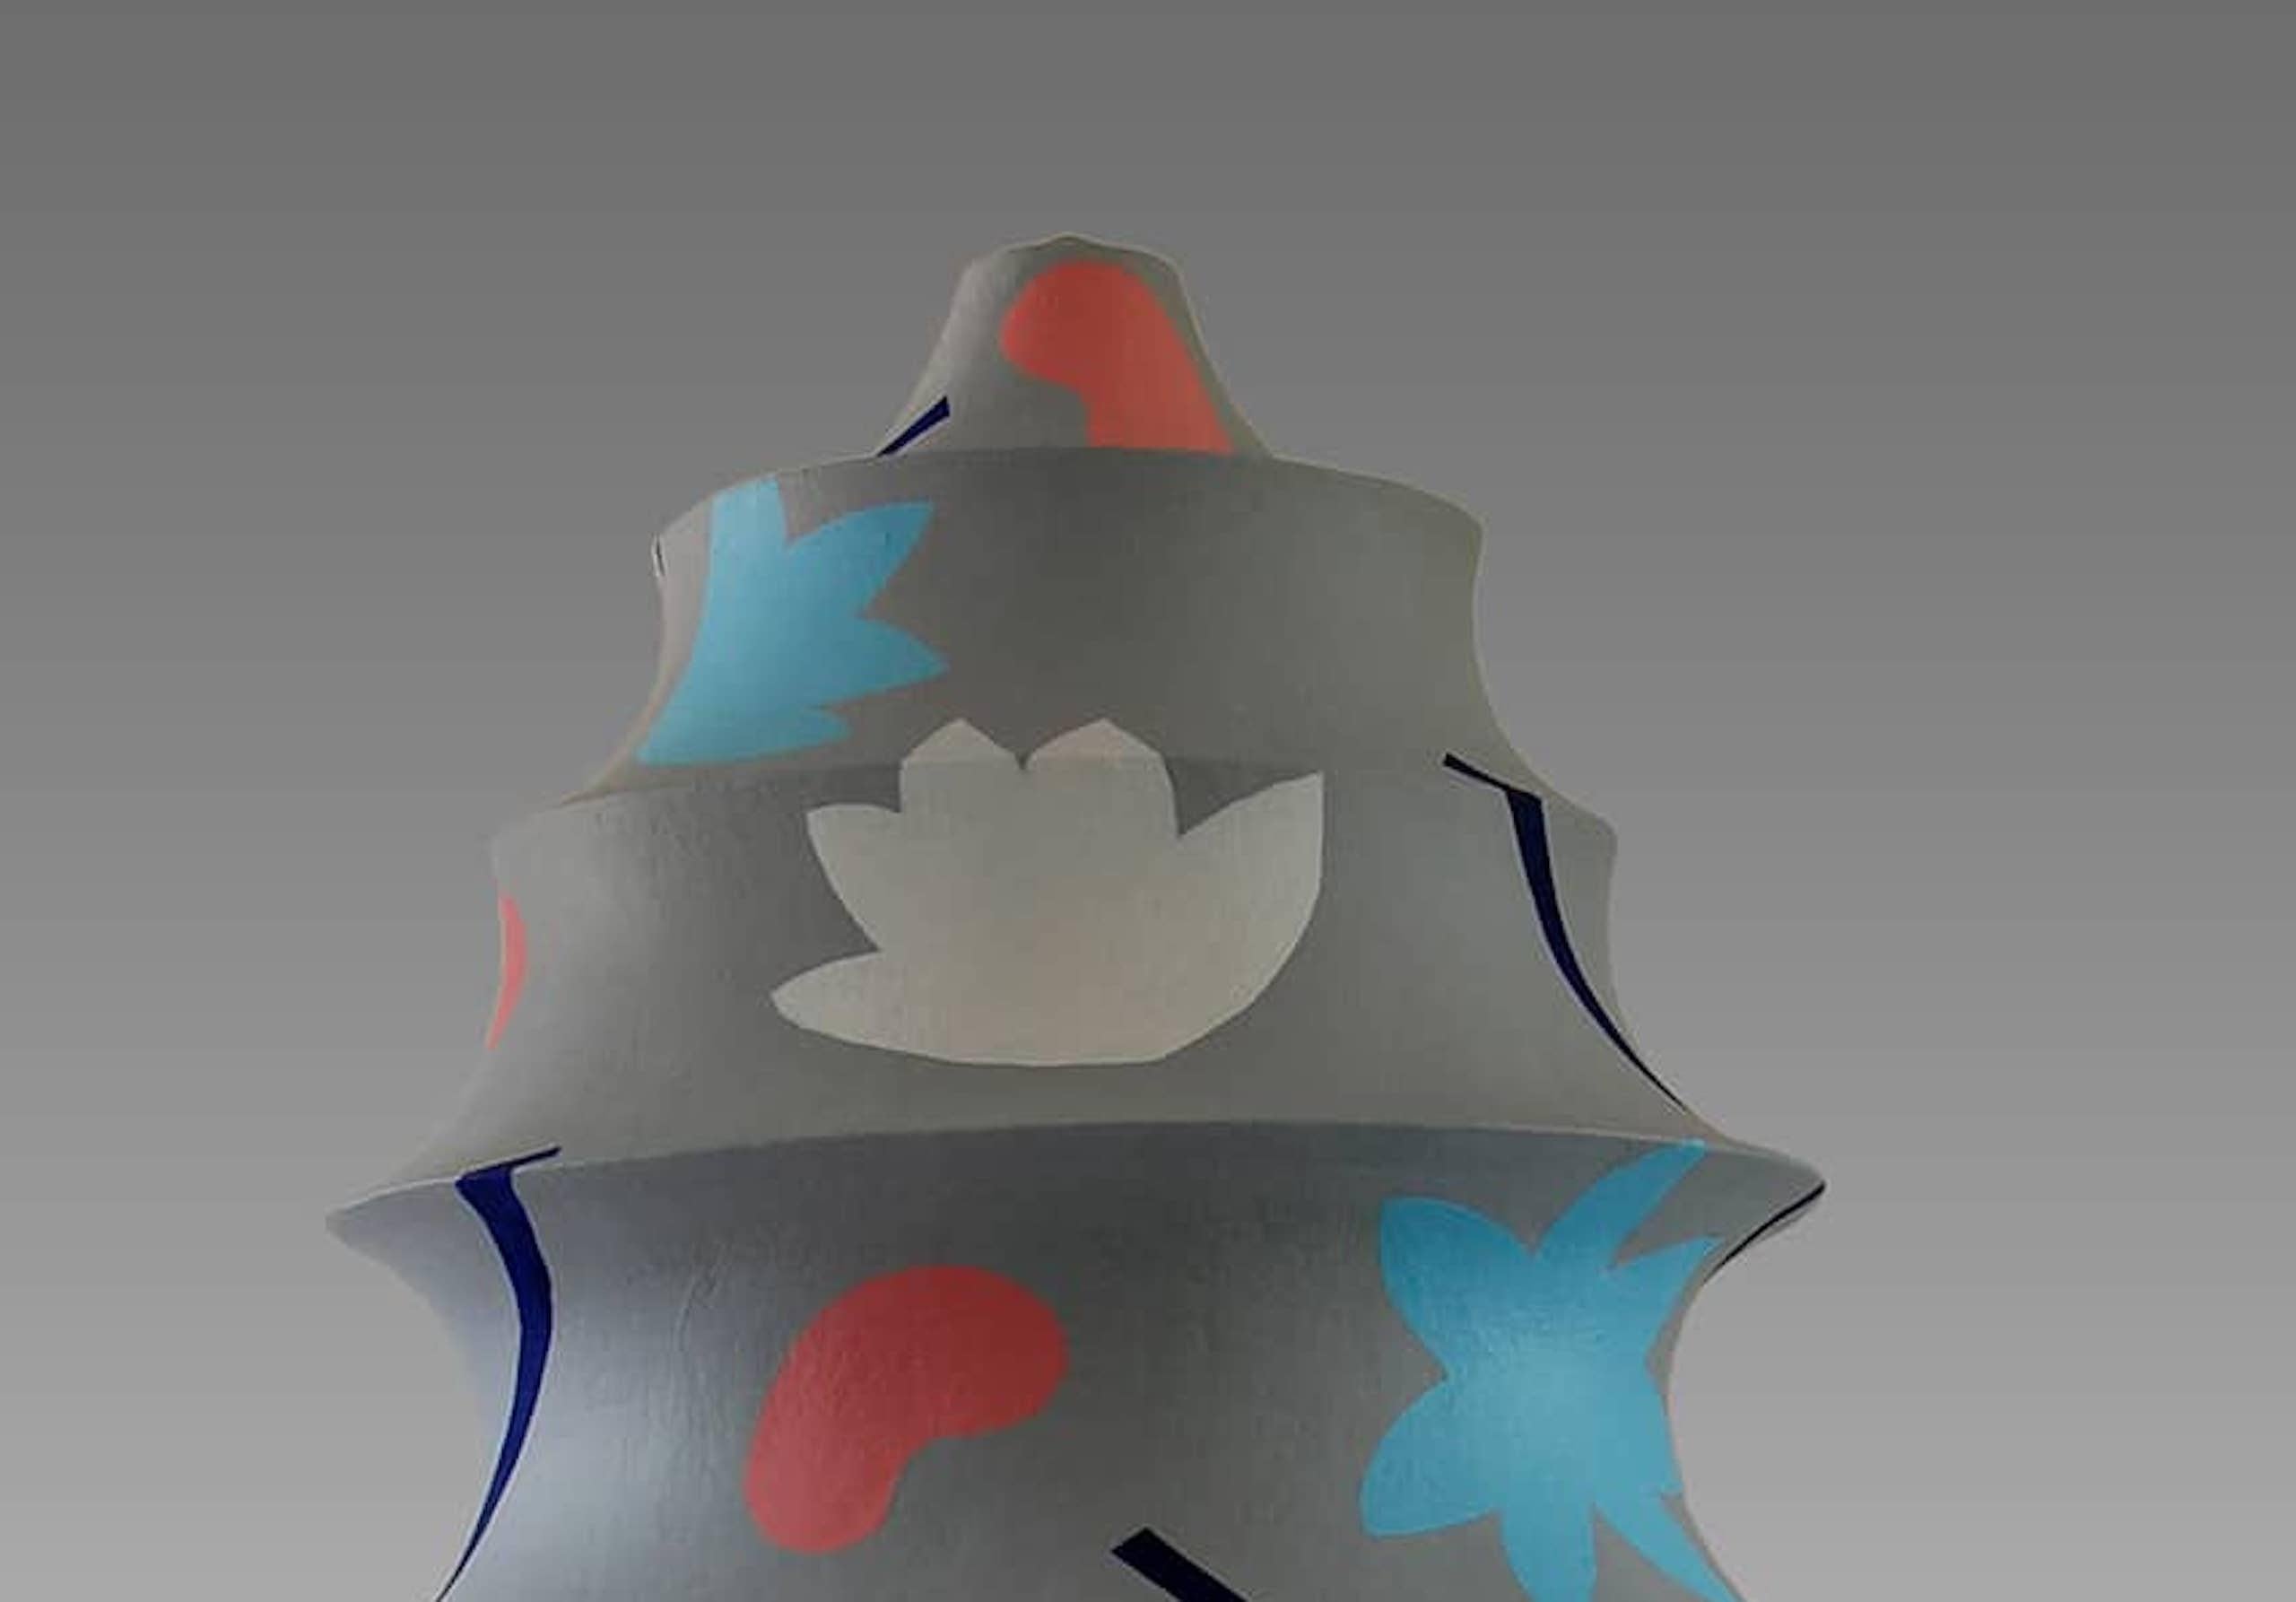 Twilight by Patricia Volk - Abstract ceramic sculpture, painted clay, flowers For Sale 4